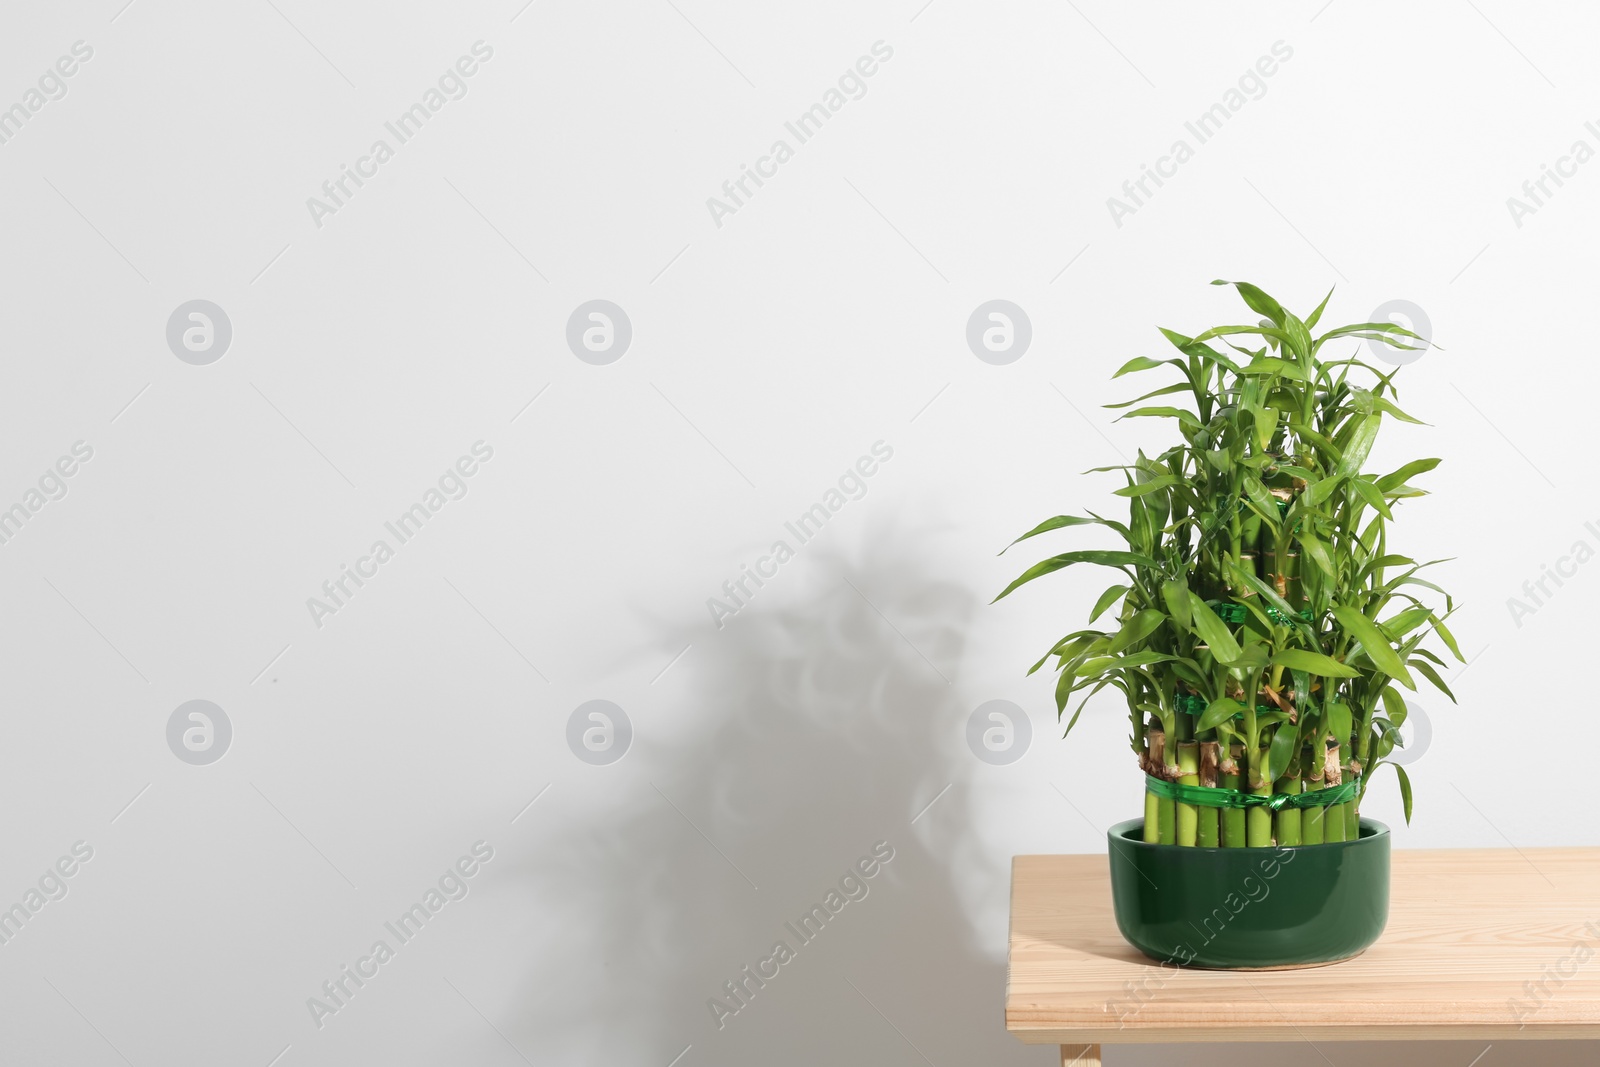 Photo of Pot with green bamboo on table against light background. Space for text